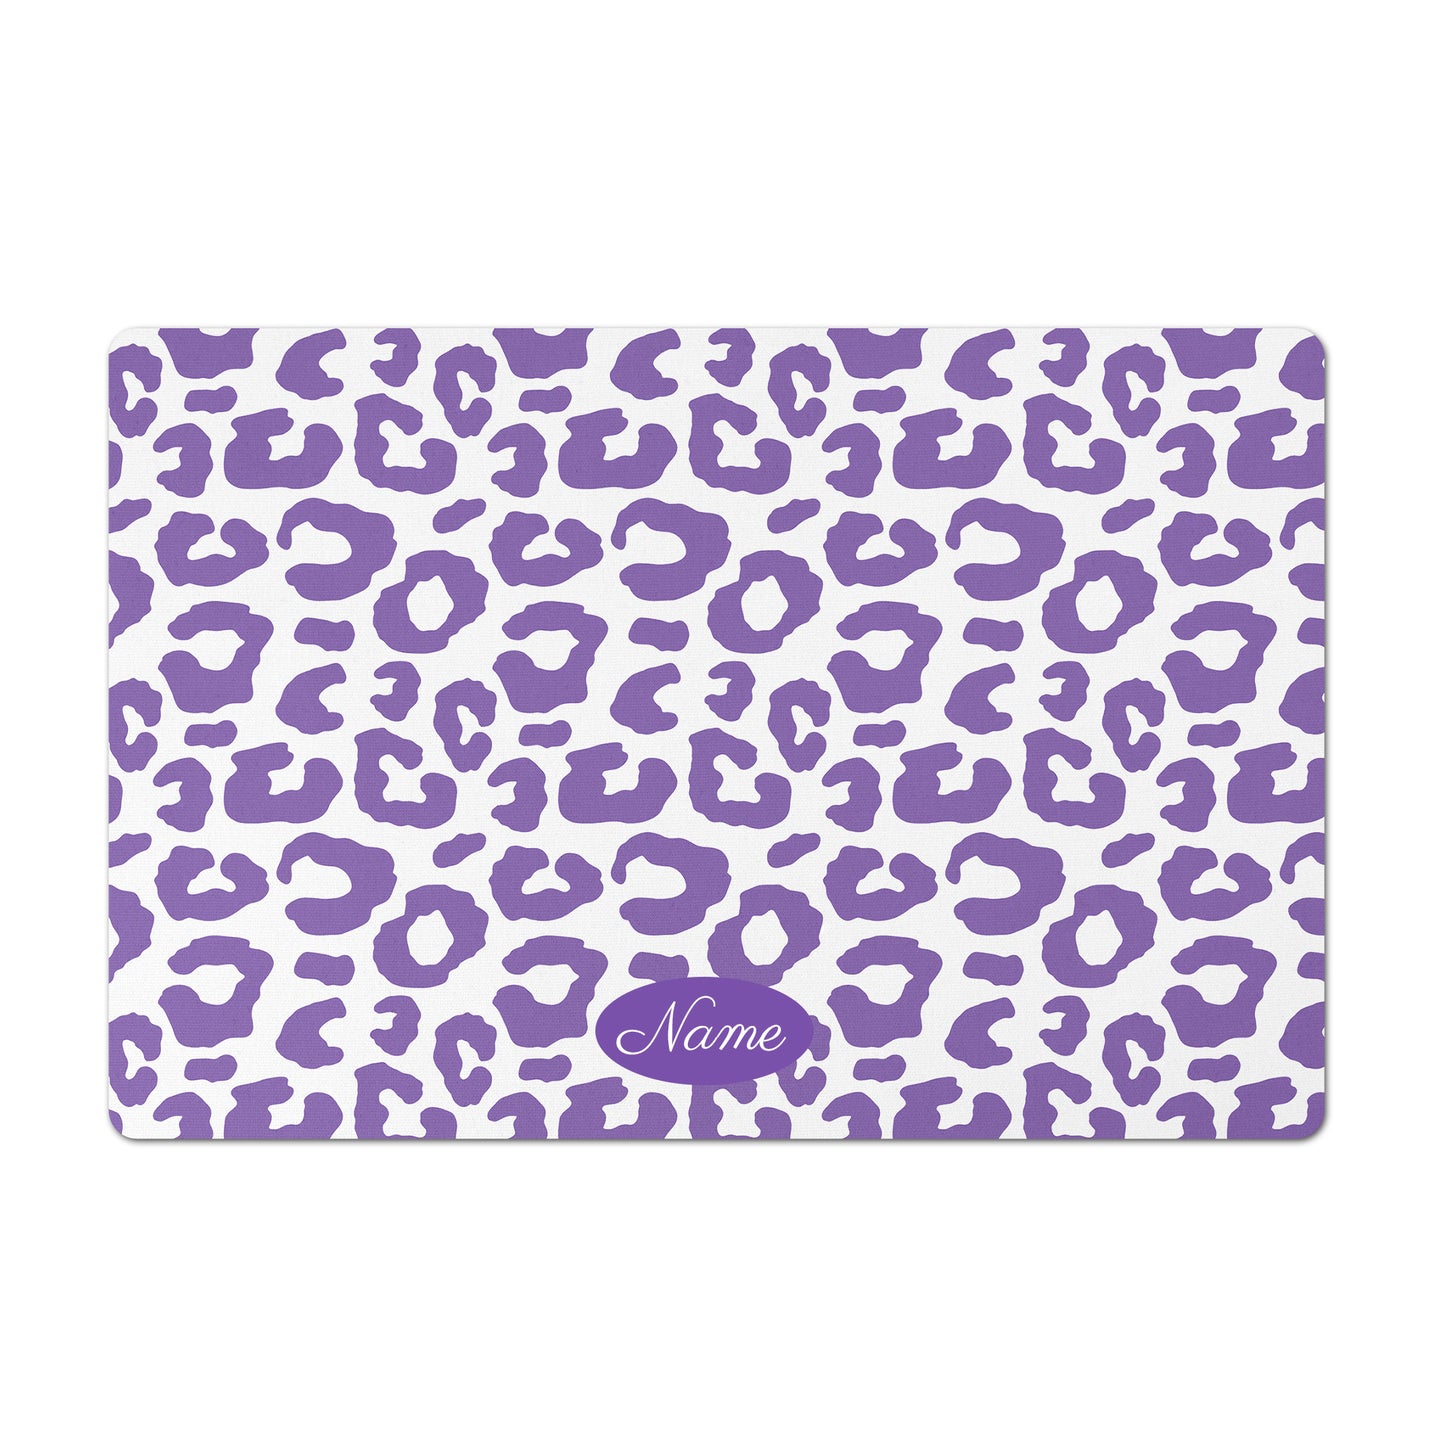 Personalized Leopard Pet Bowl Mat, Lavender and White